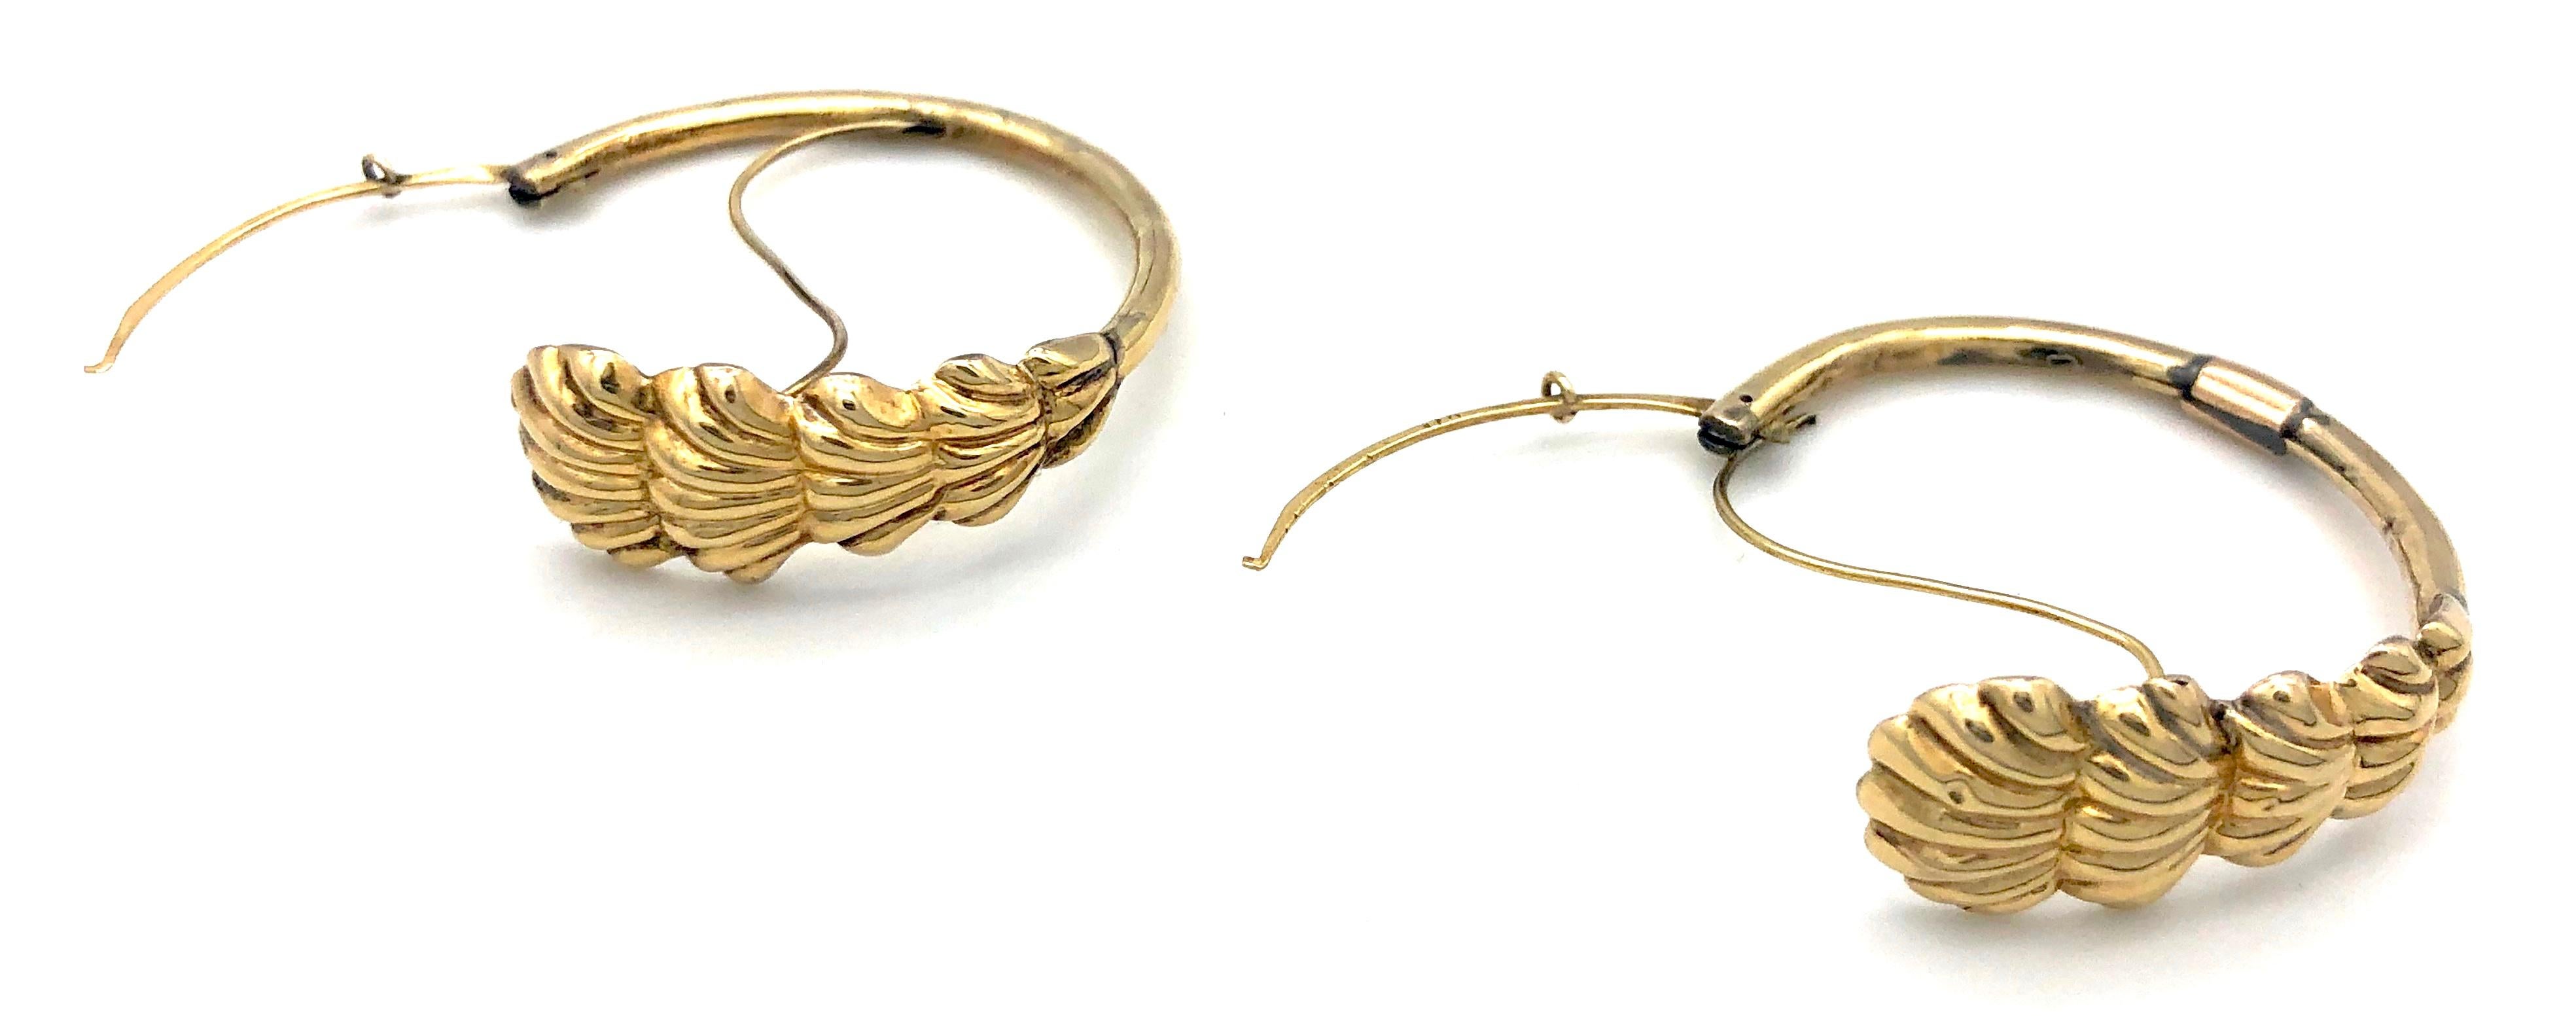 Antique Empire 14 Karat Gold Hoops Scallop Ornaments In Good Condition For Sale In Munich, Bavaria